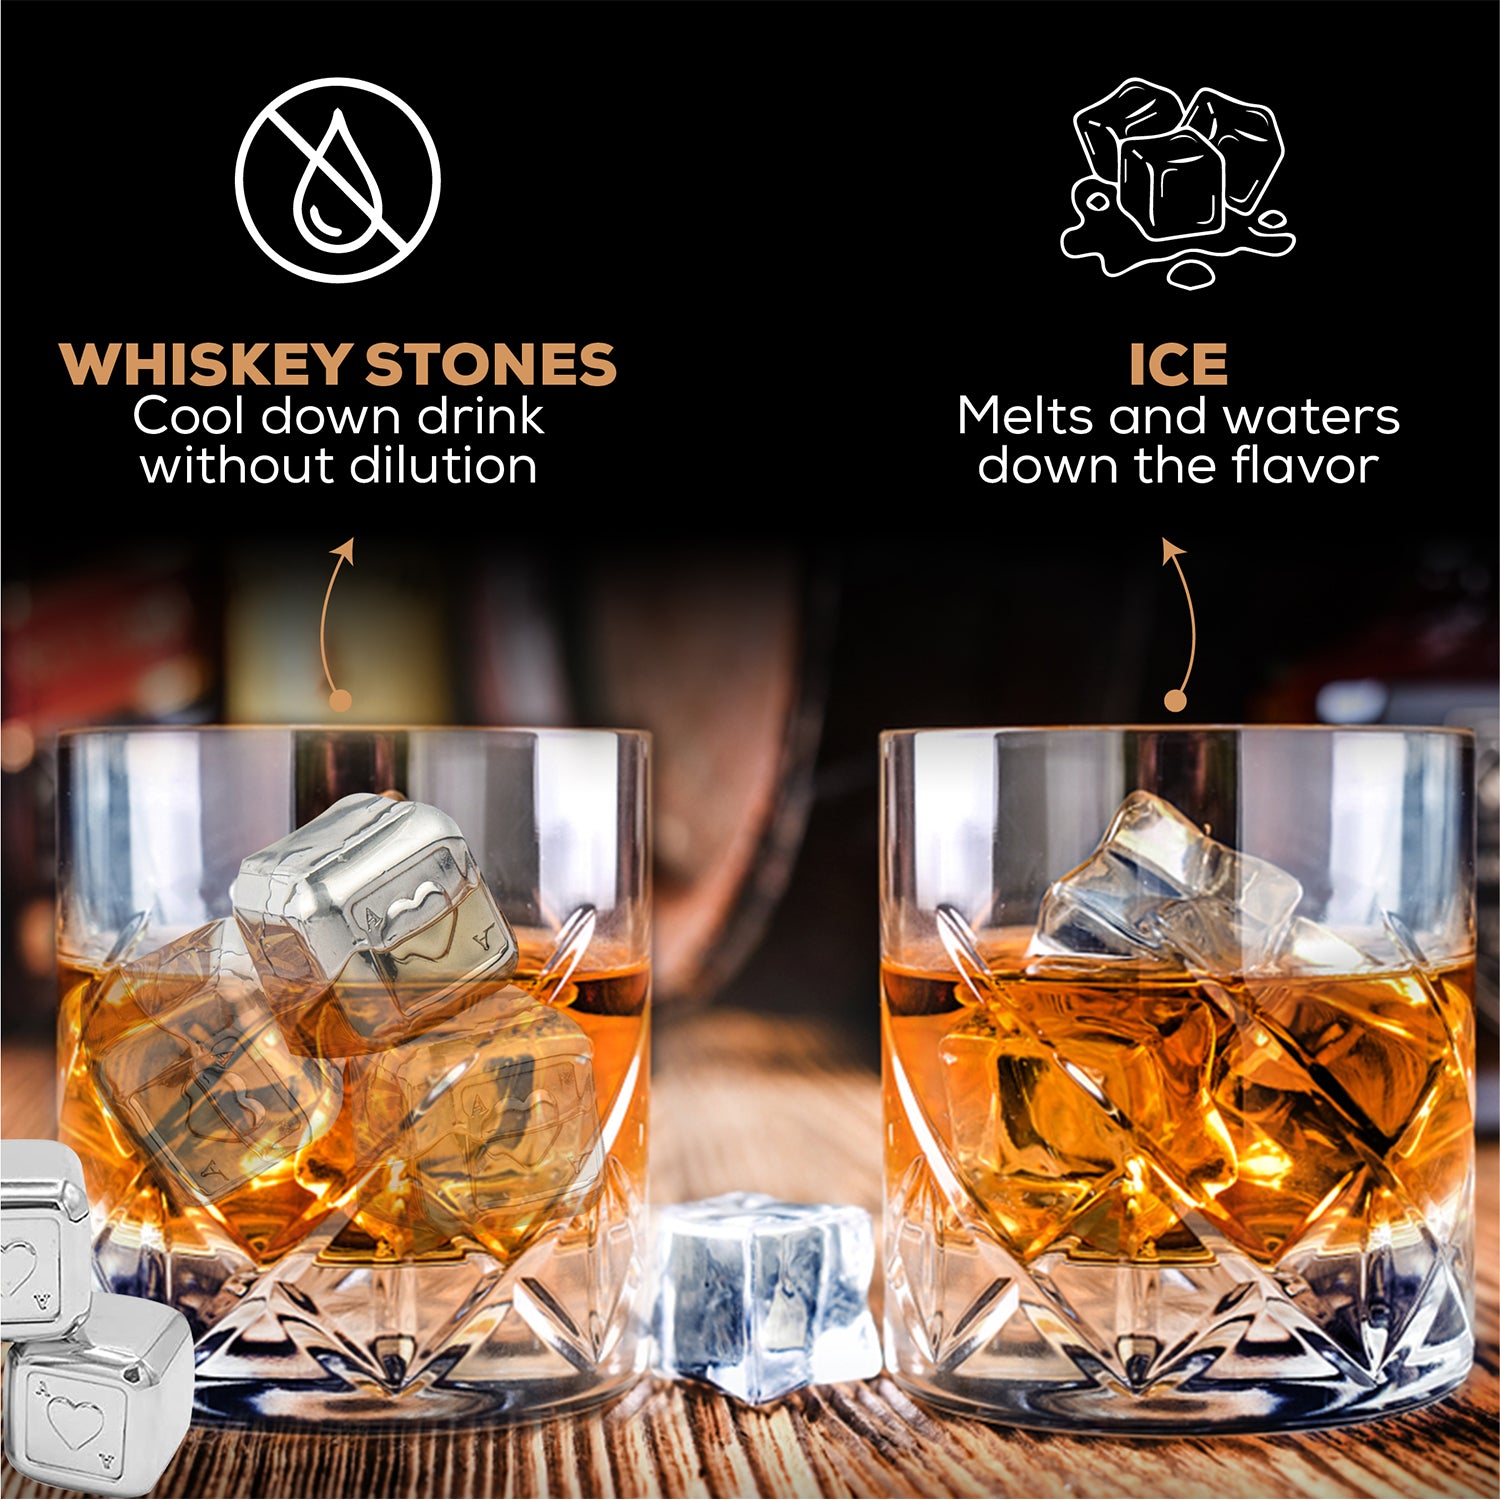 The Perfect Gift For Your Father- "To My Father" Whisky Glass Gift Set